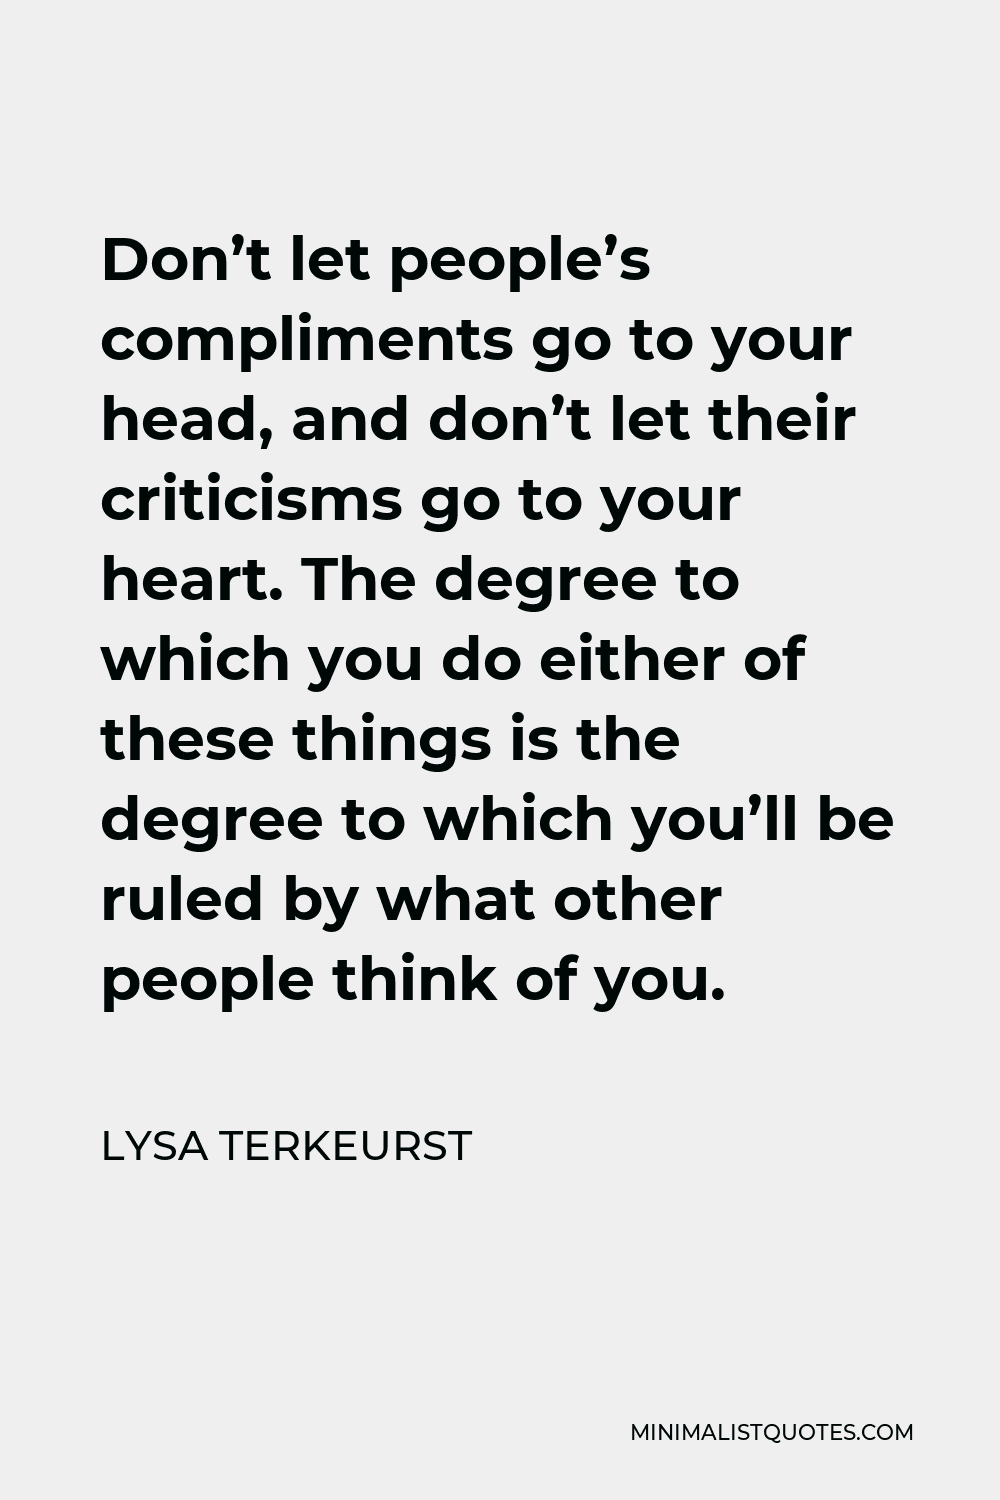 Lysa TerKeurst Quote - Don’t let people’s compliments go to your head, and don’t let their criticisms go to your heart. The degree to which you do either of these things is the degree to which you’ll be ruled by what other people think of you.